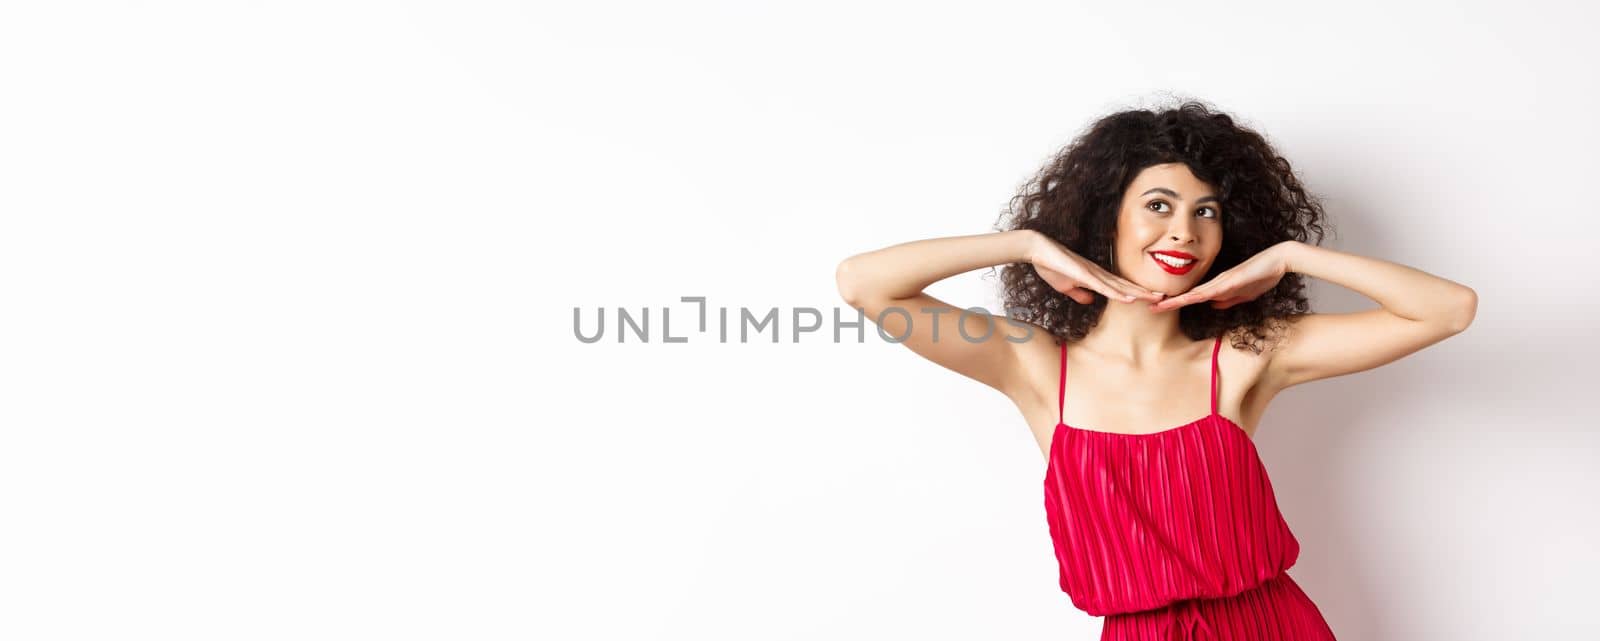 Beautiful lady with curly hair, wearing red dress, showing hear face with makeup and smiling, feeling carefree on white background.